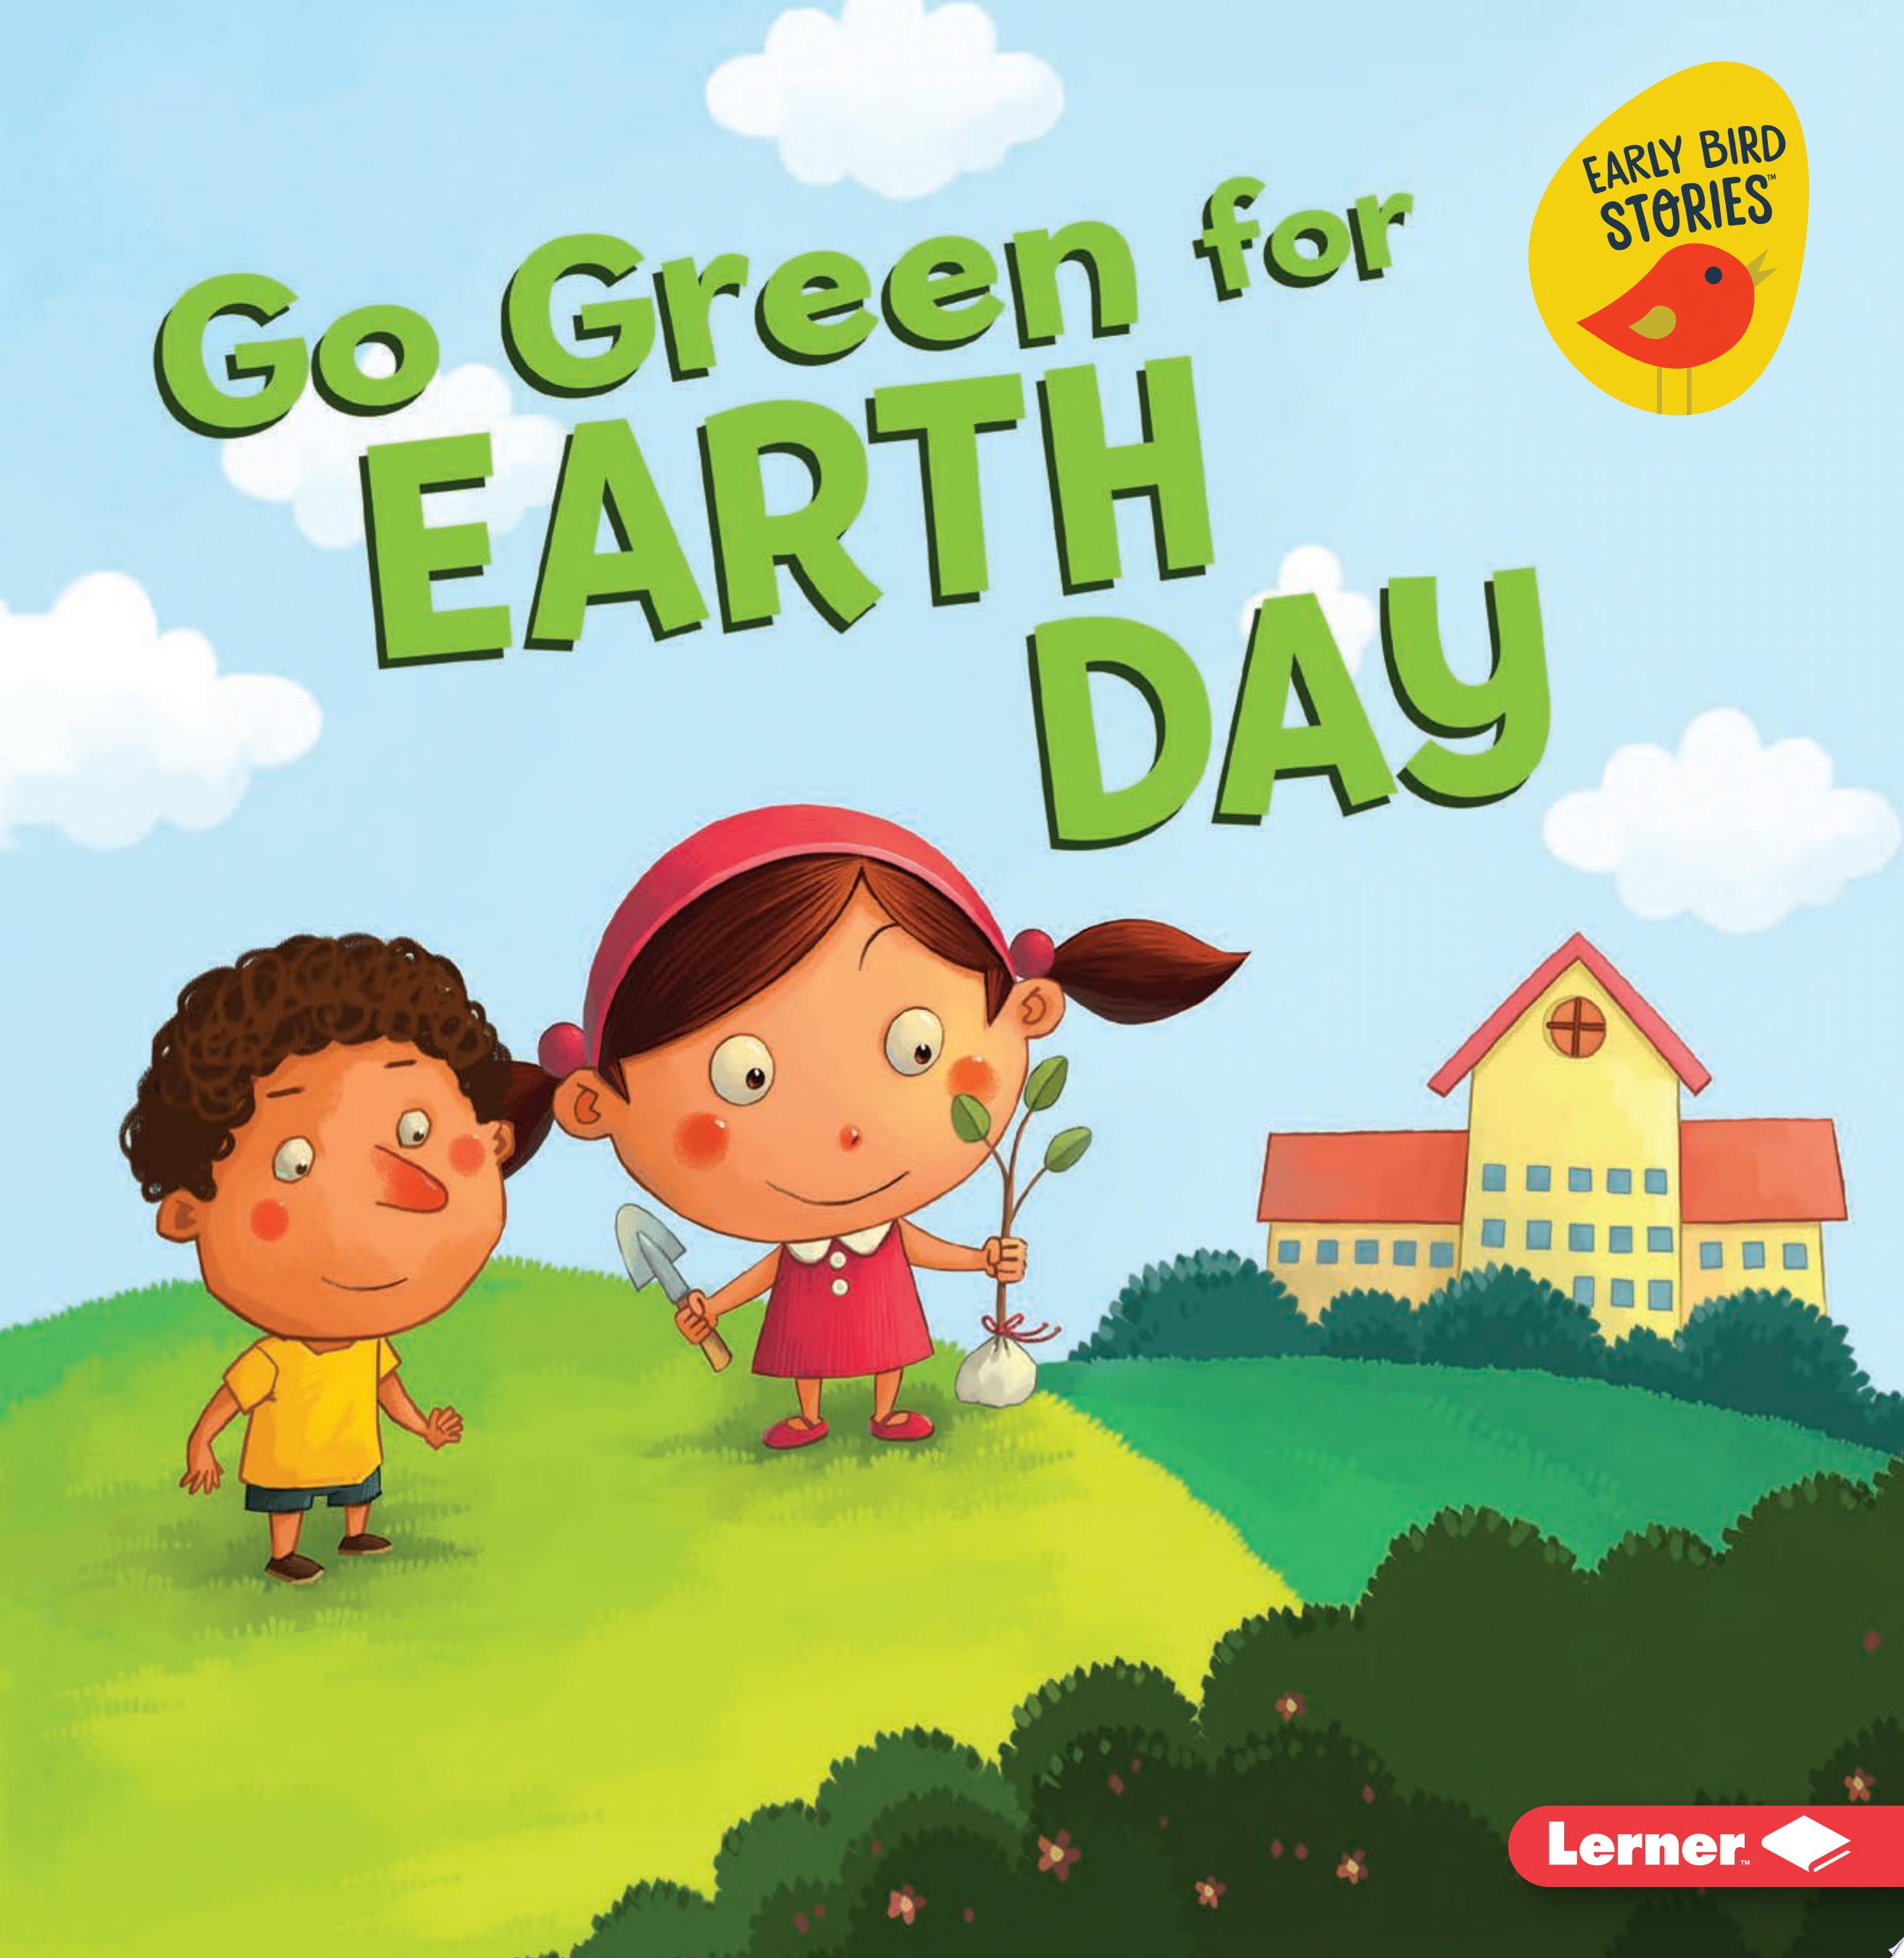 Image for "Go Green for Earth Day"